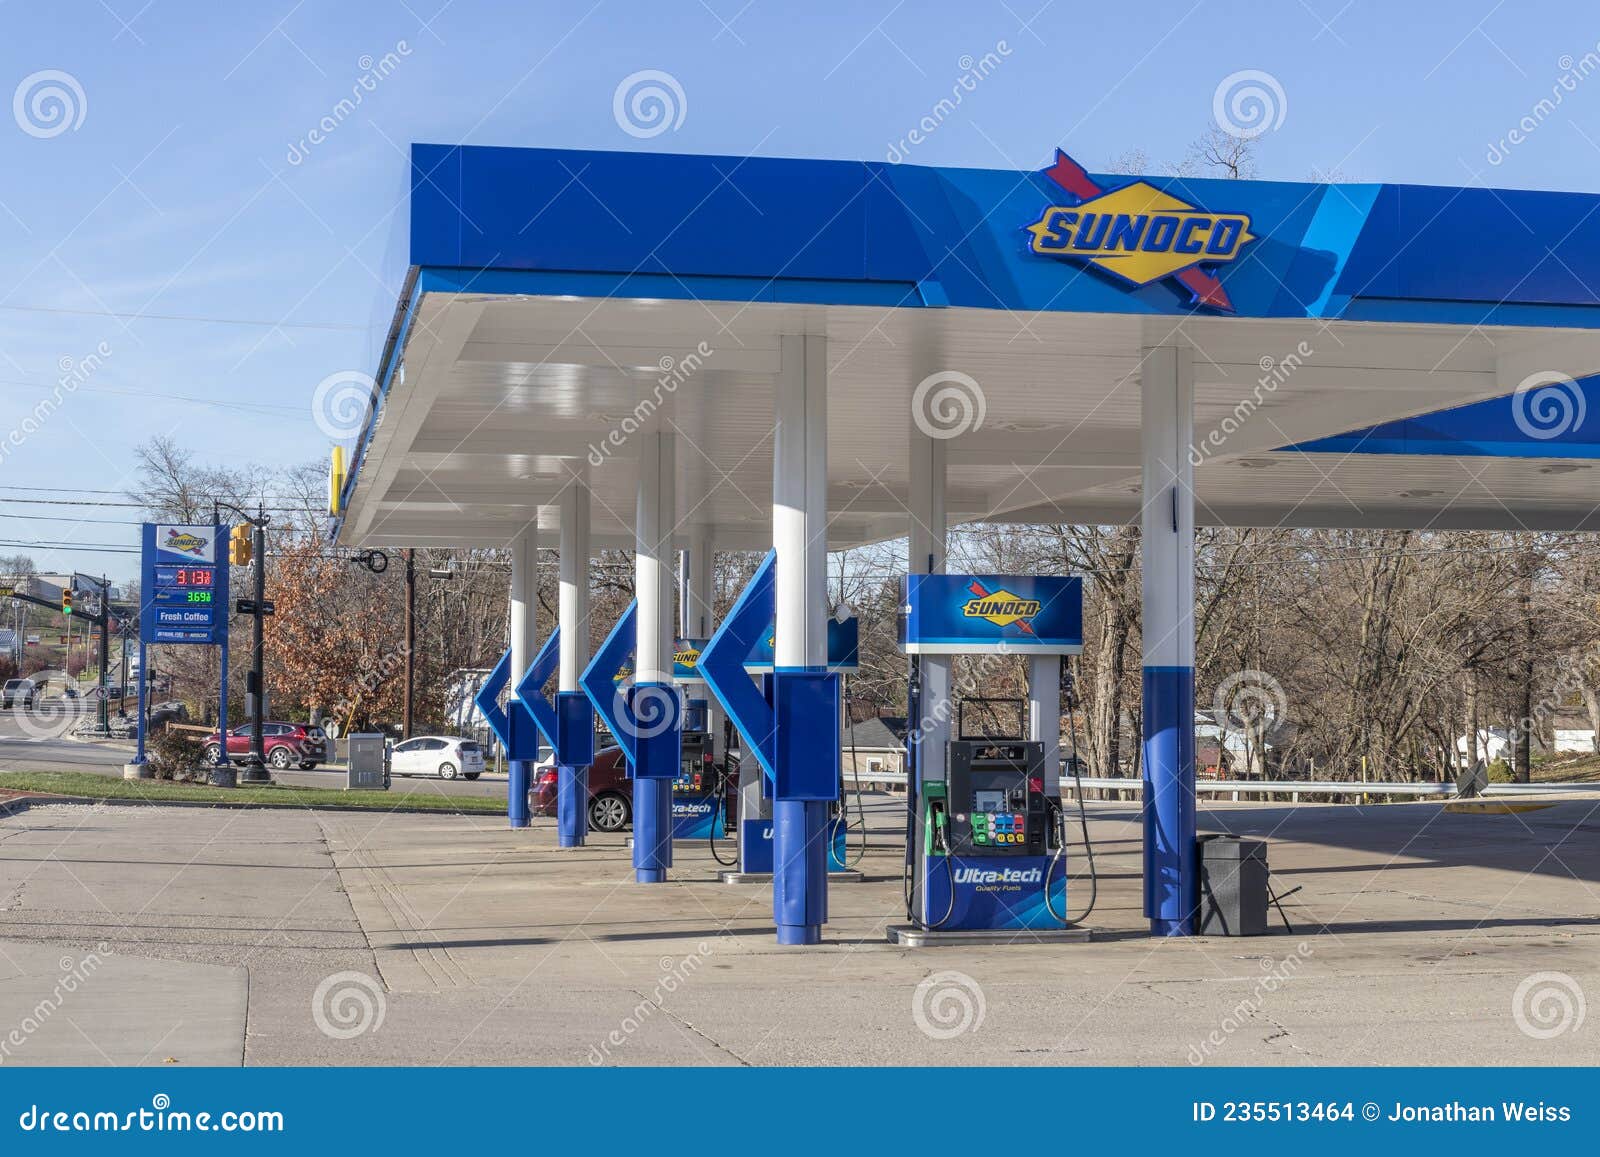 Sunoco Now Offering Top Tier Gasoline at All Locations - McIntosh Energy